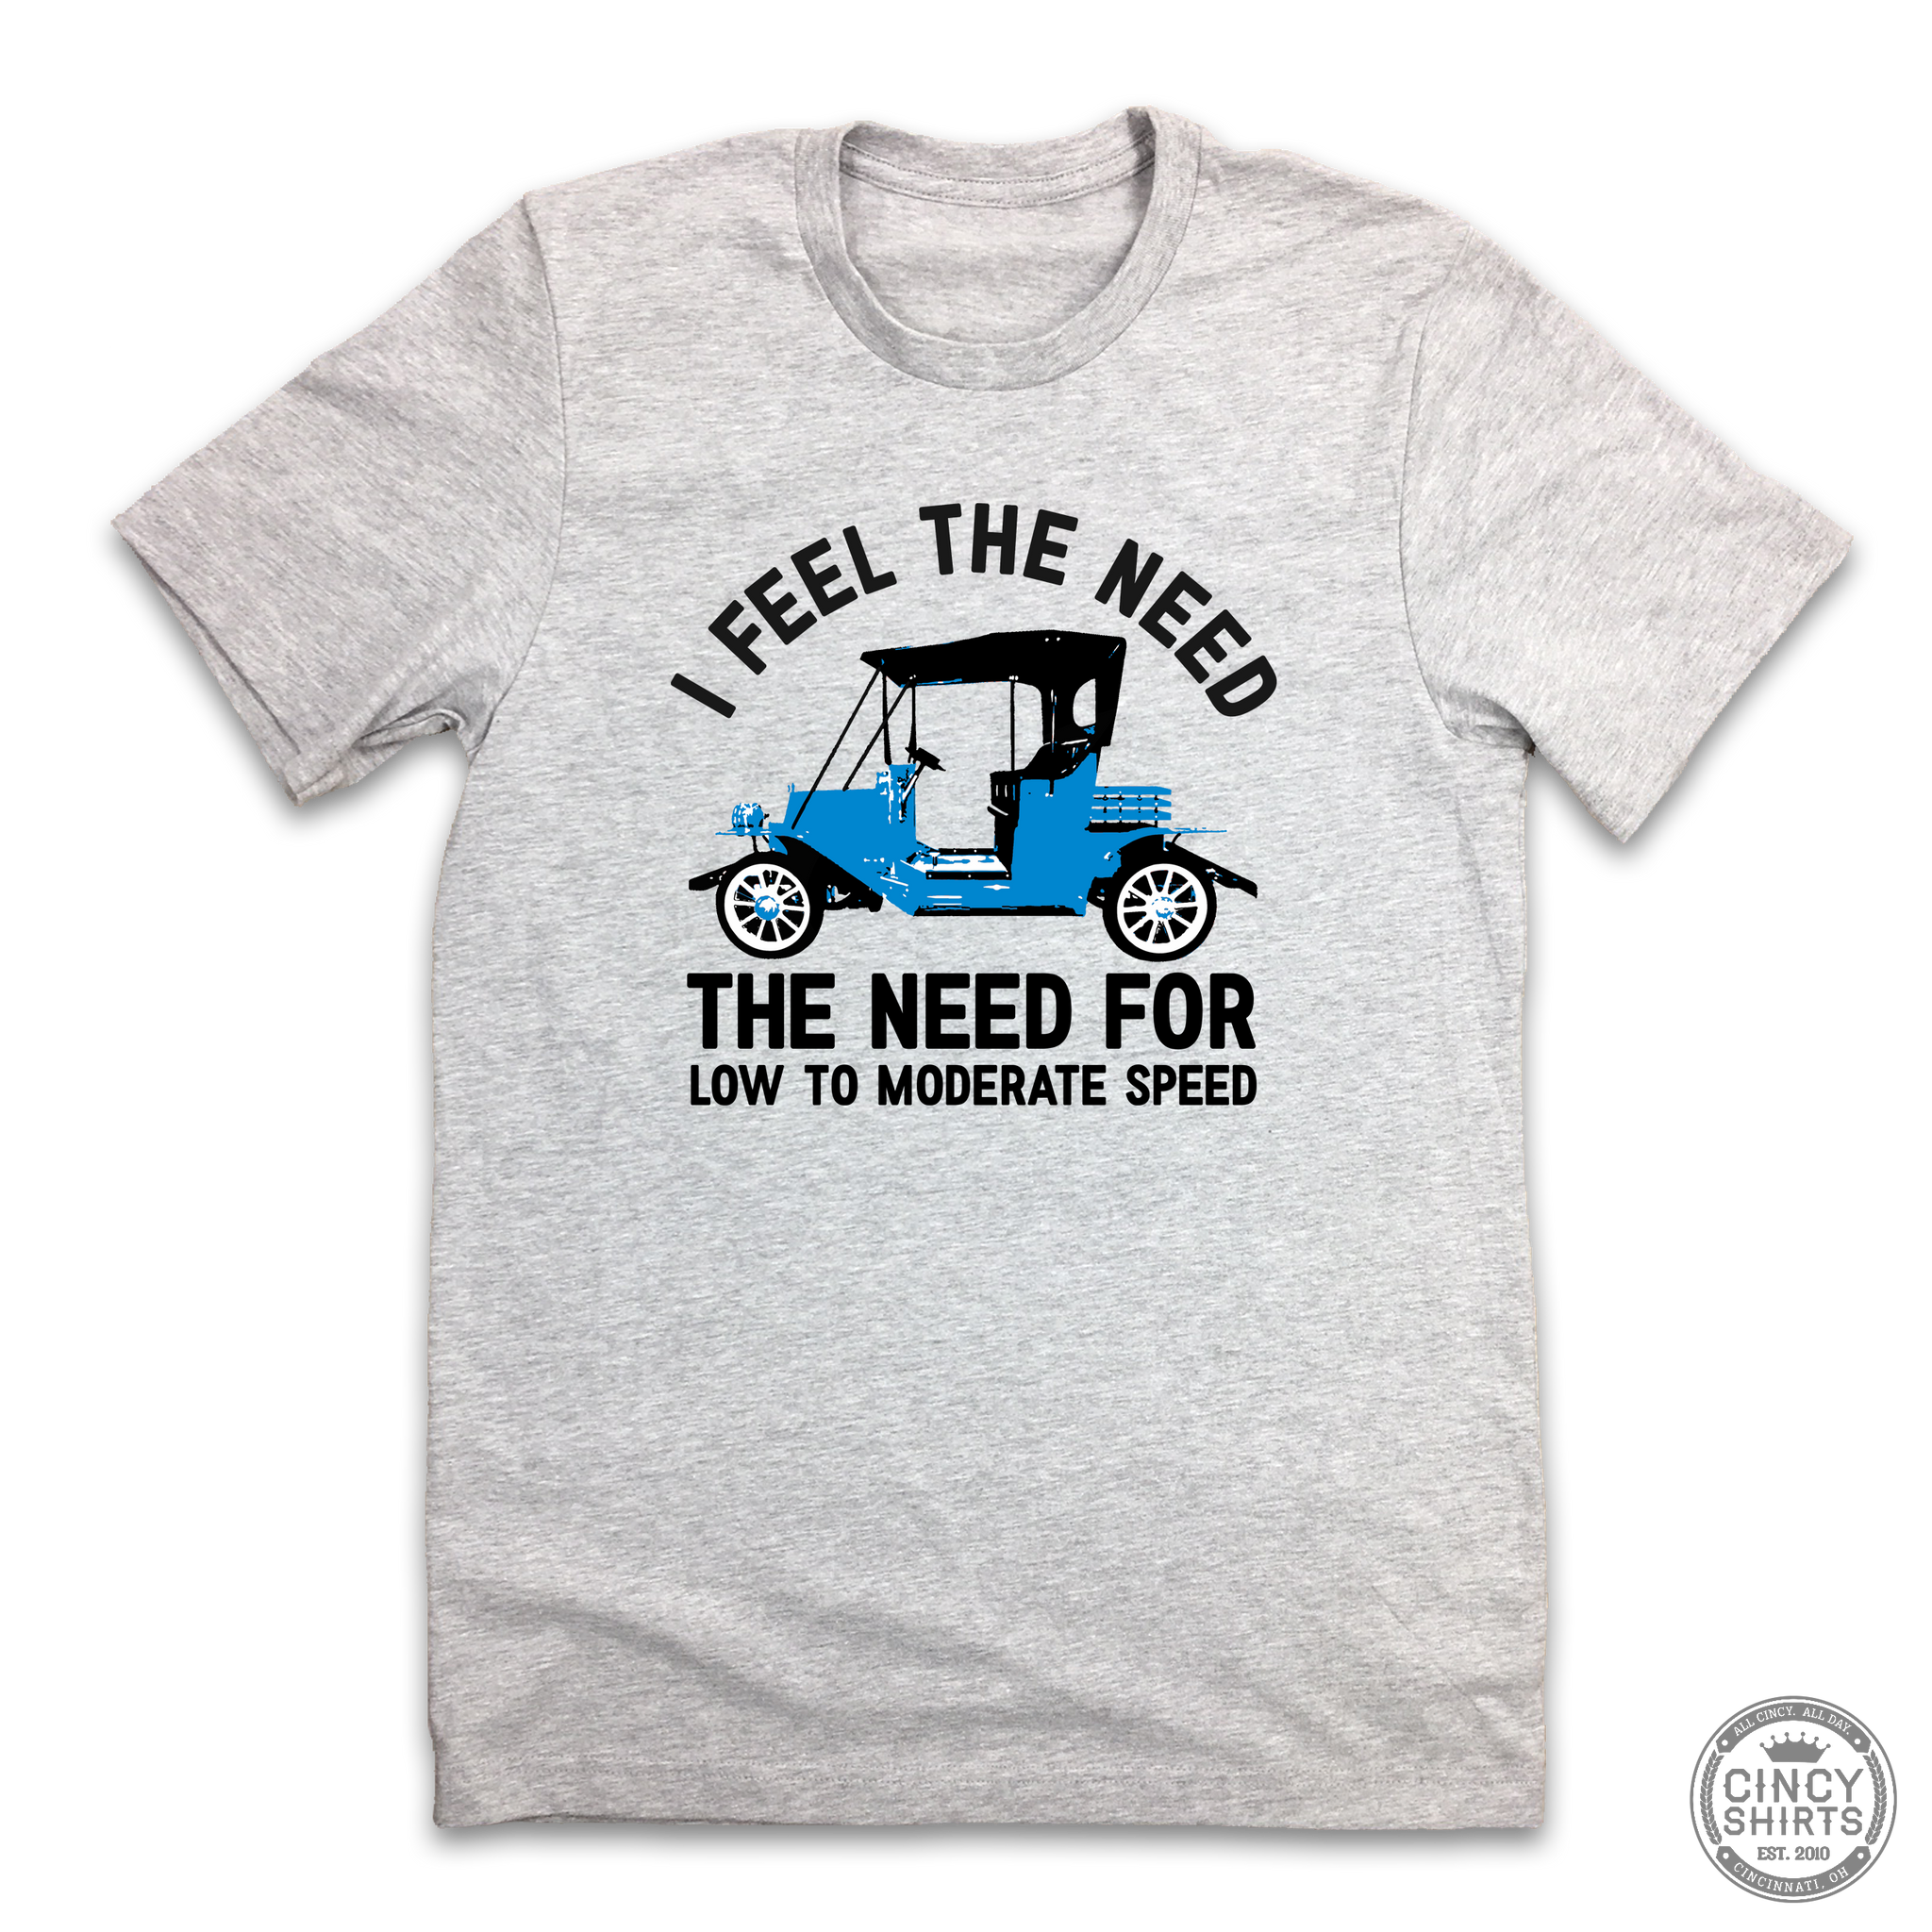 I Feel The Need The Need For Speed T-Shirt